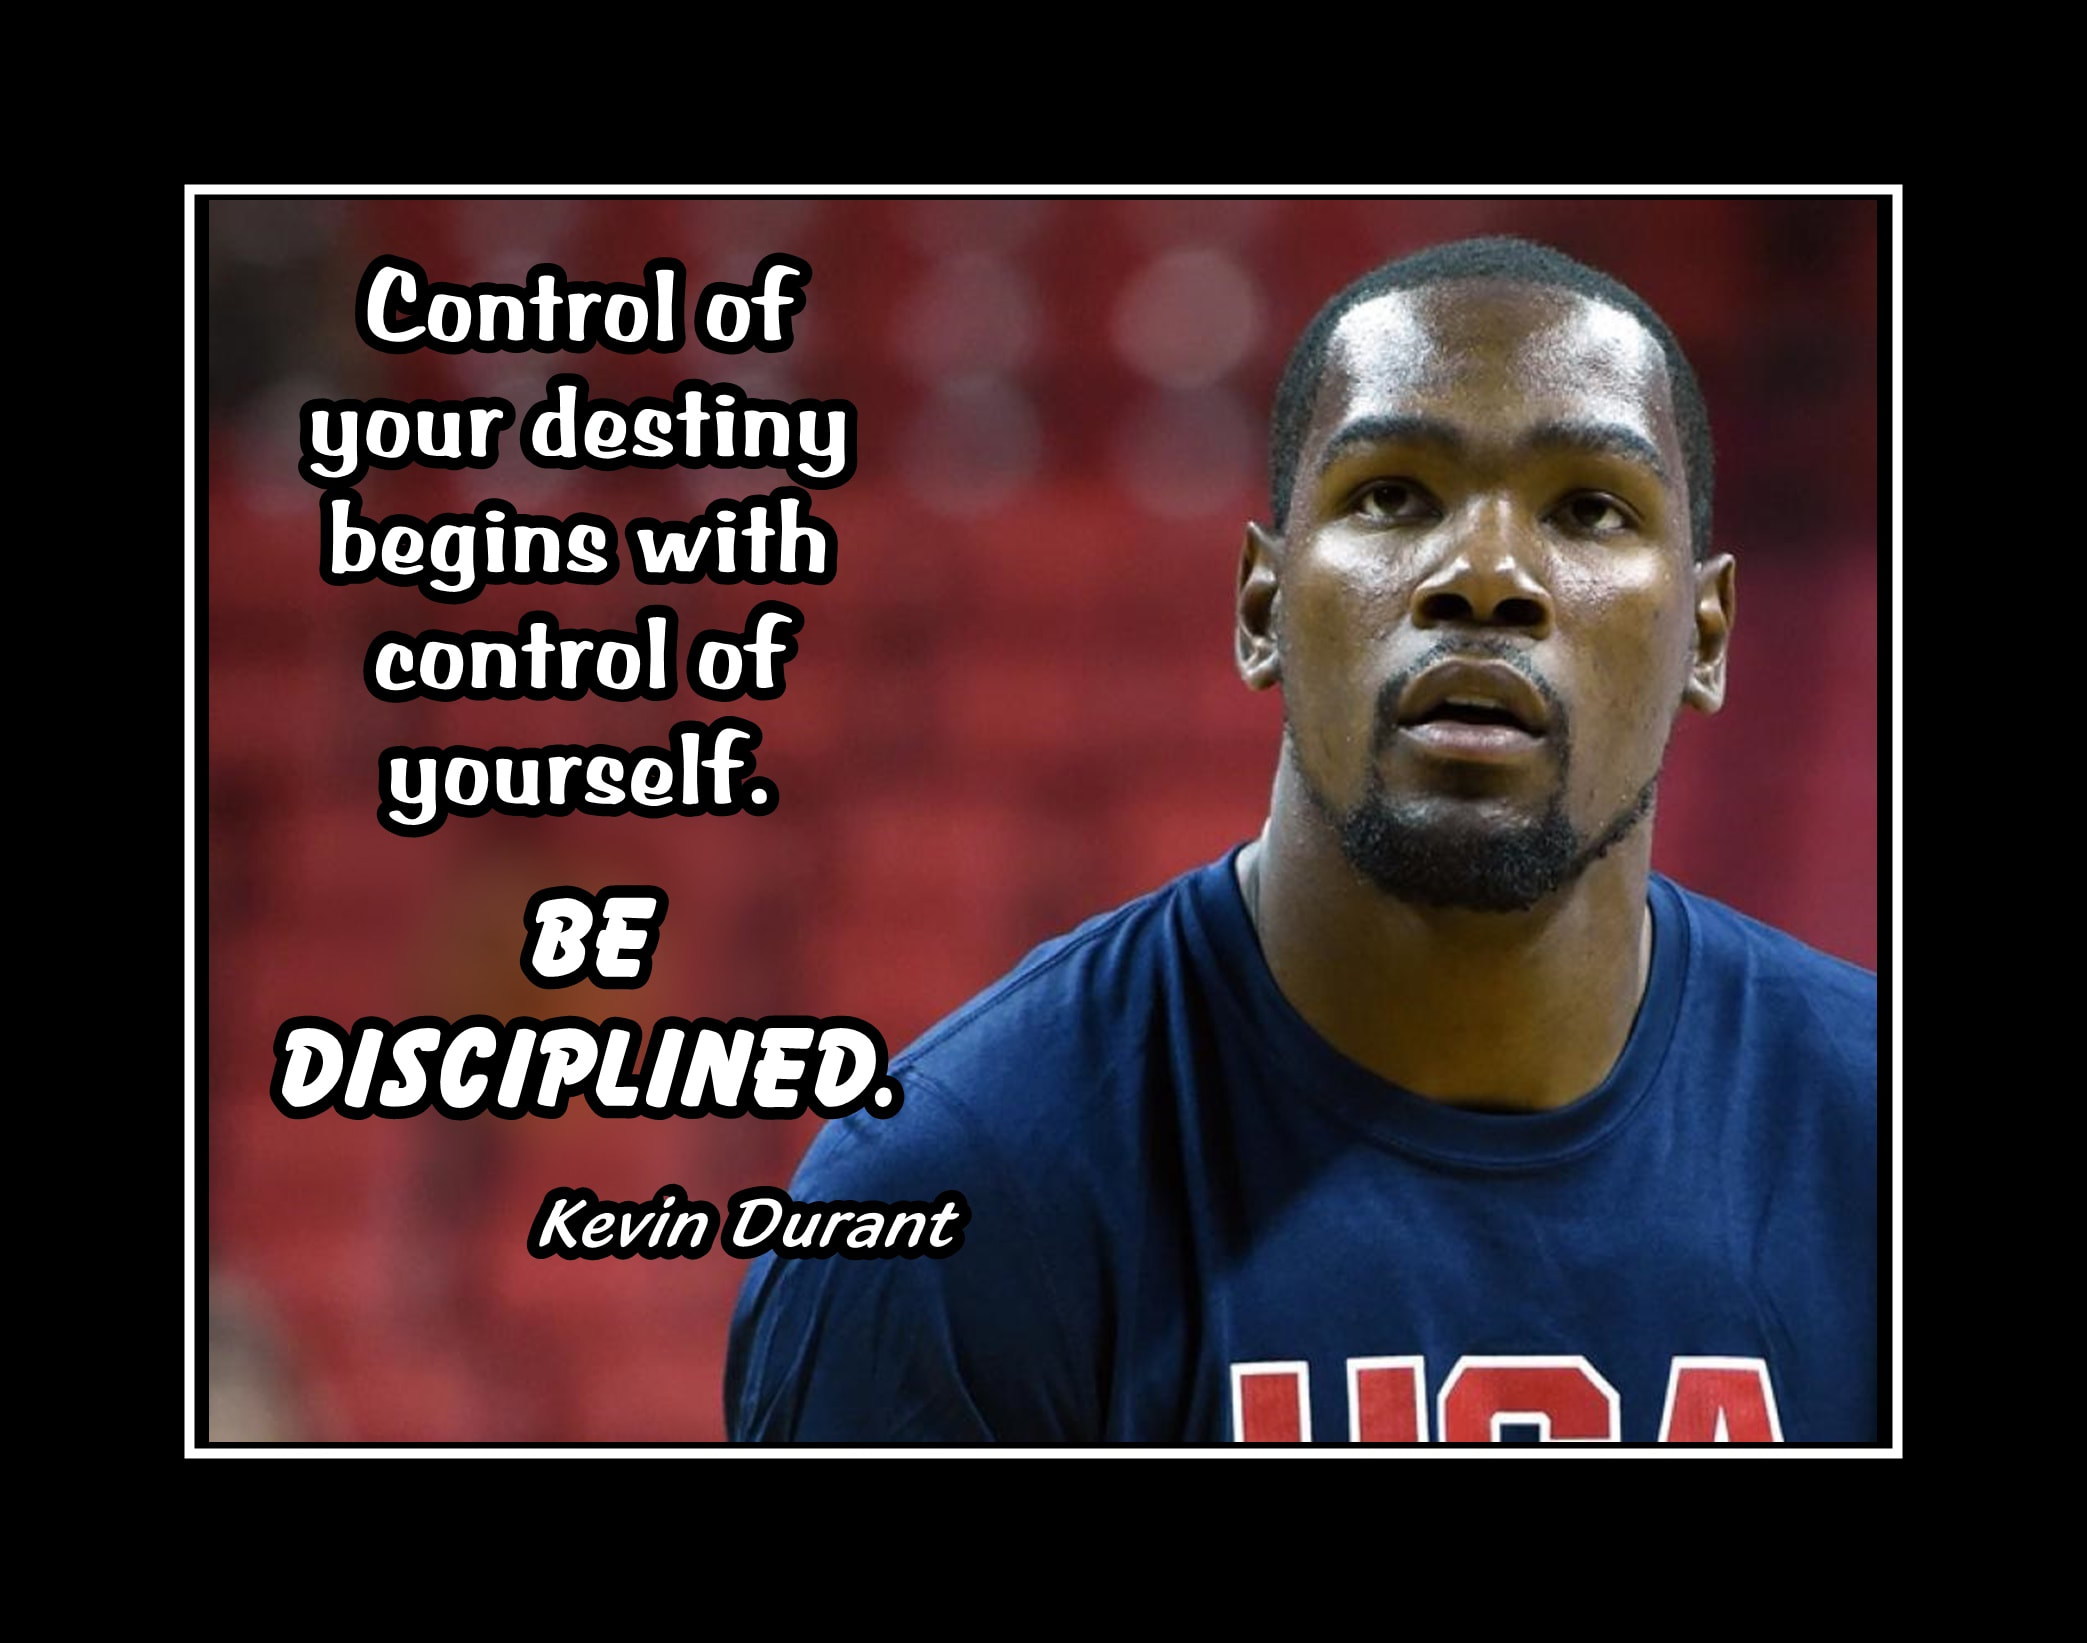 Kevin Durant Motivational Quote Basketball Silk Poster 12x18 inch 